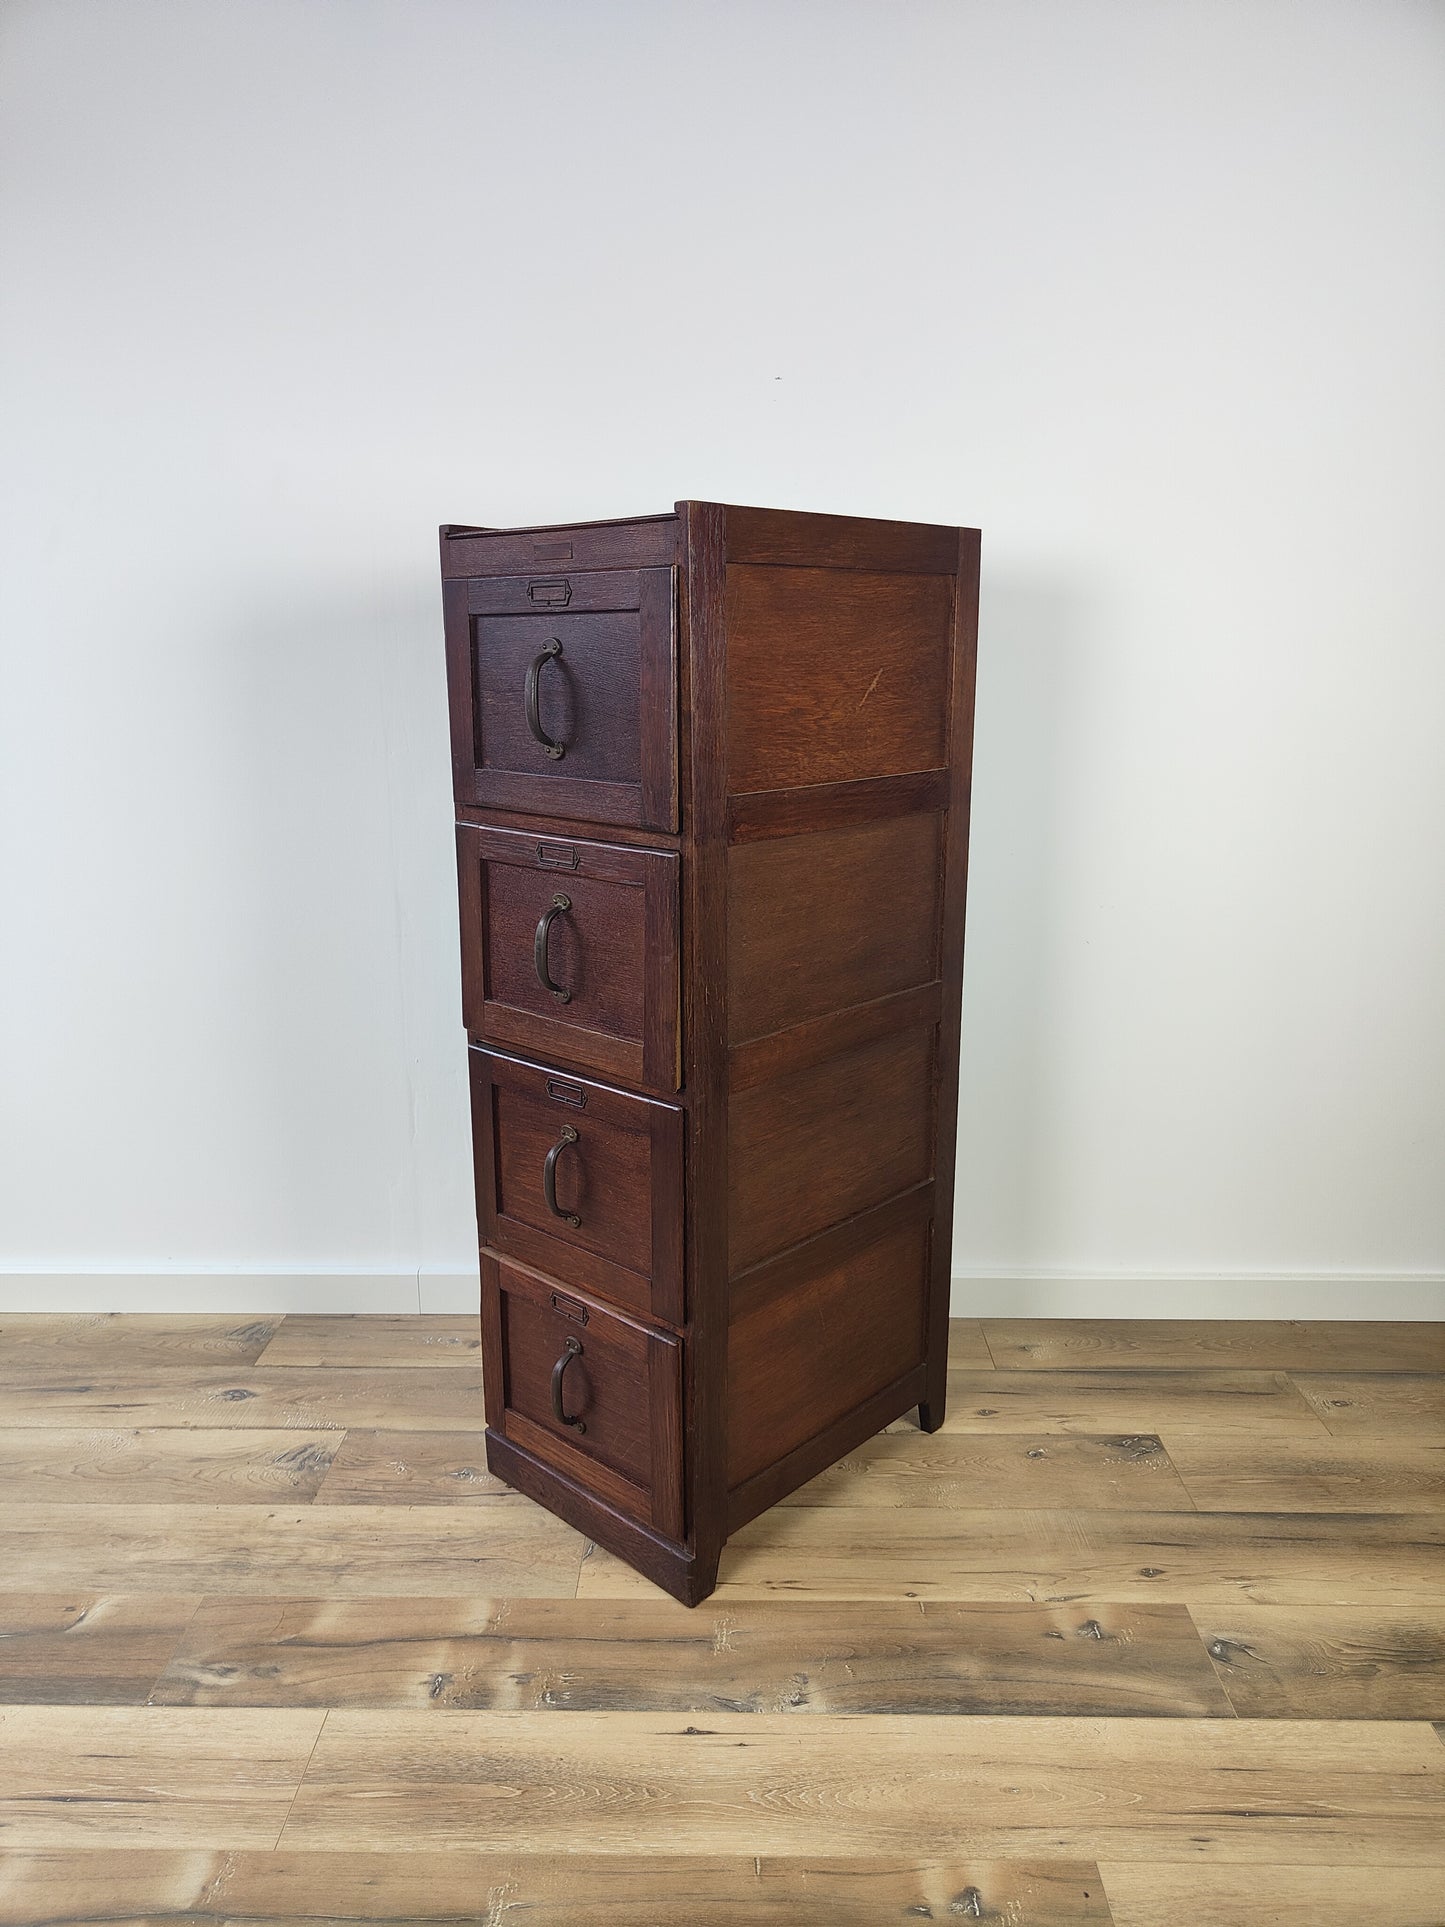 Beautiful Antique Filing Cabinet Of Dutch Real Estate Teile And Schouten Leiden